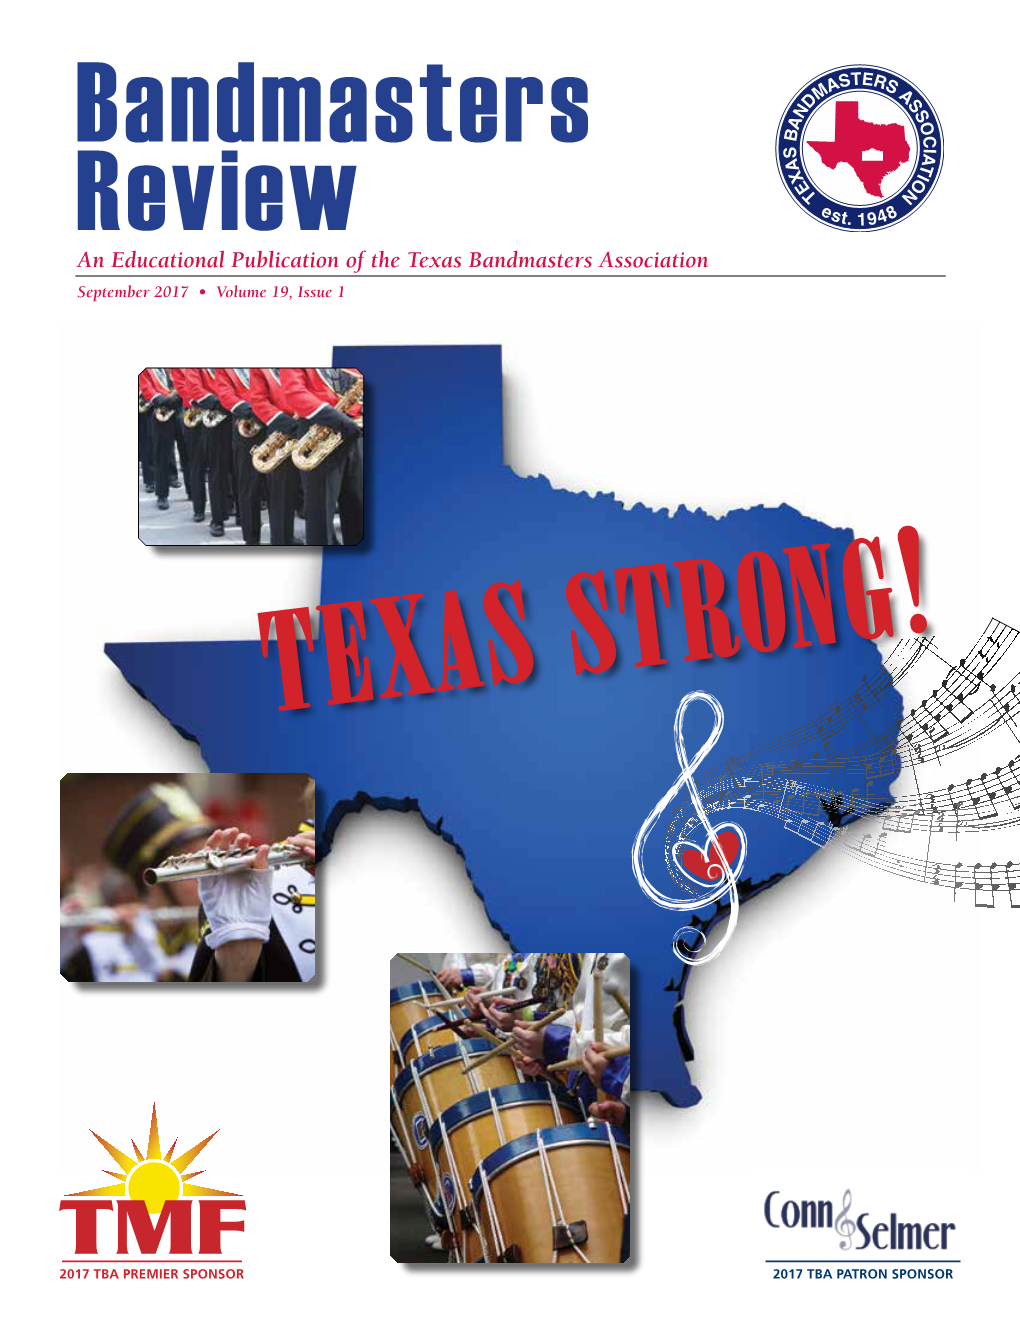 An Educational Publication of the Texas Bandmasters Association September 2017 • Volume 19, Issue 1